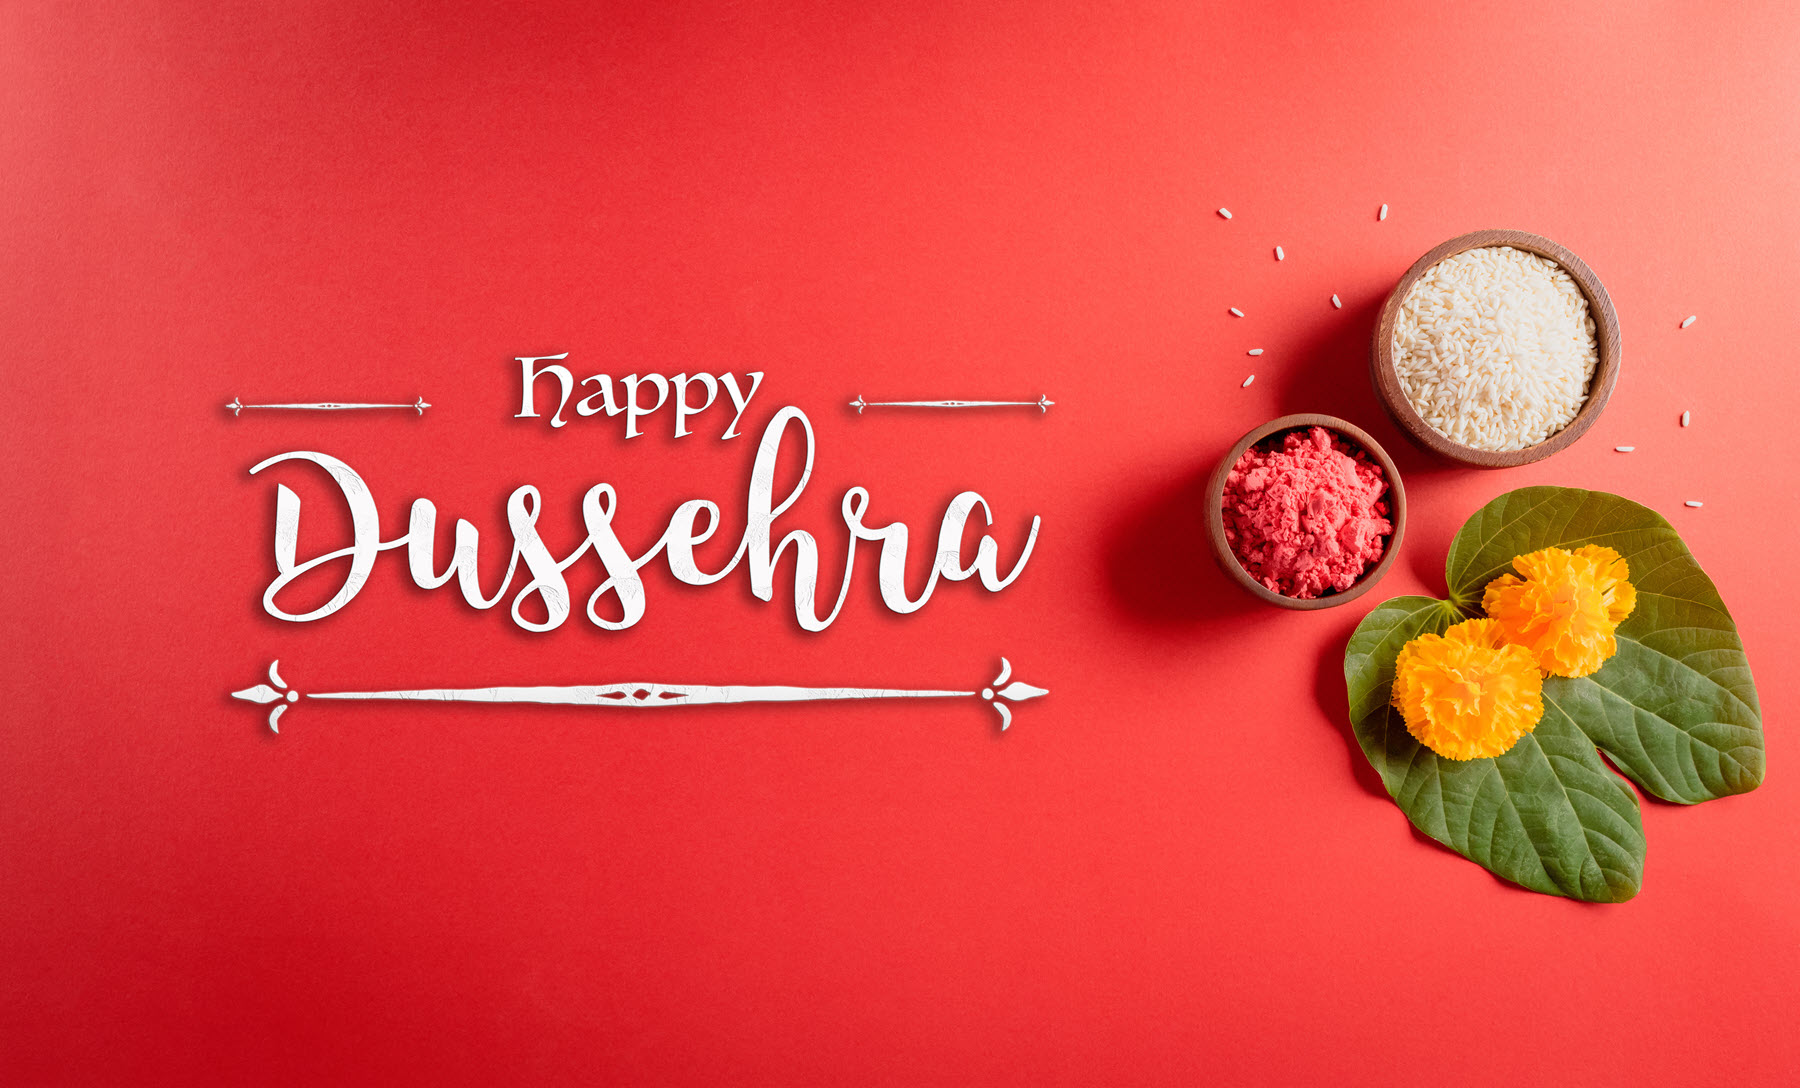 Happy Dussehra with images of bowls with food and marigold flowers atop leaves